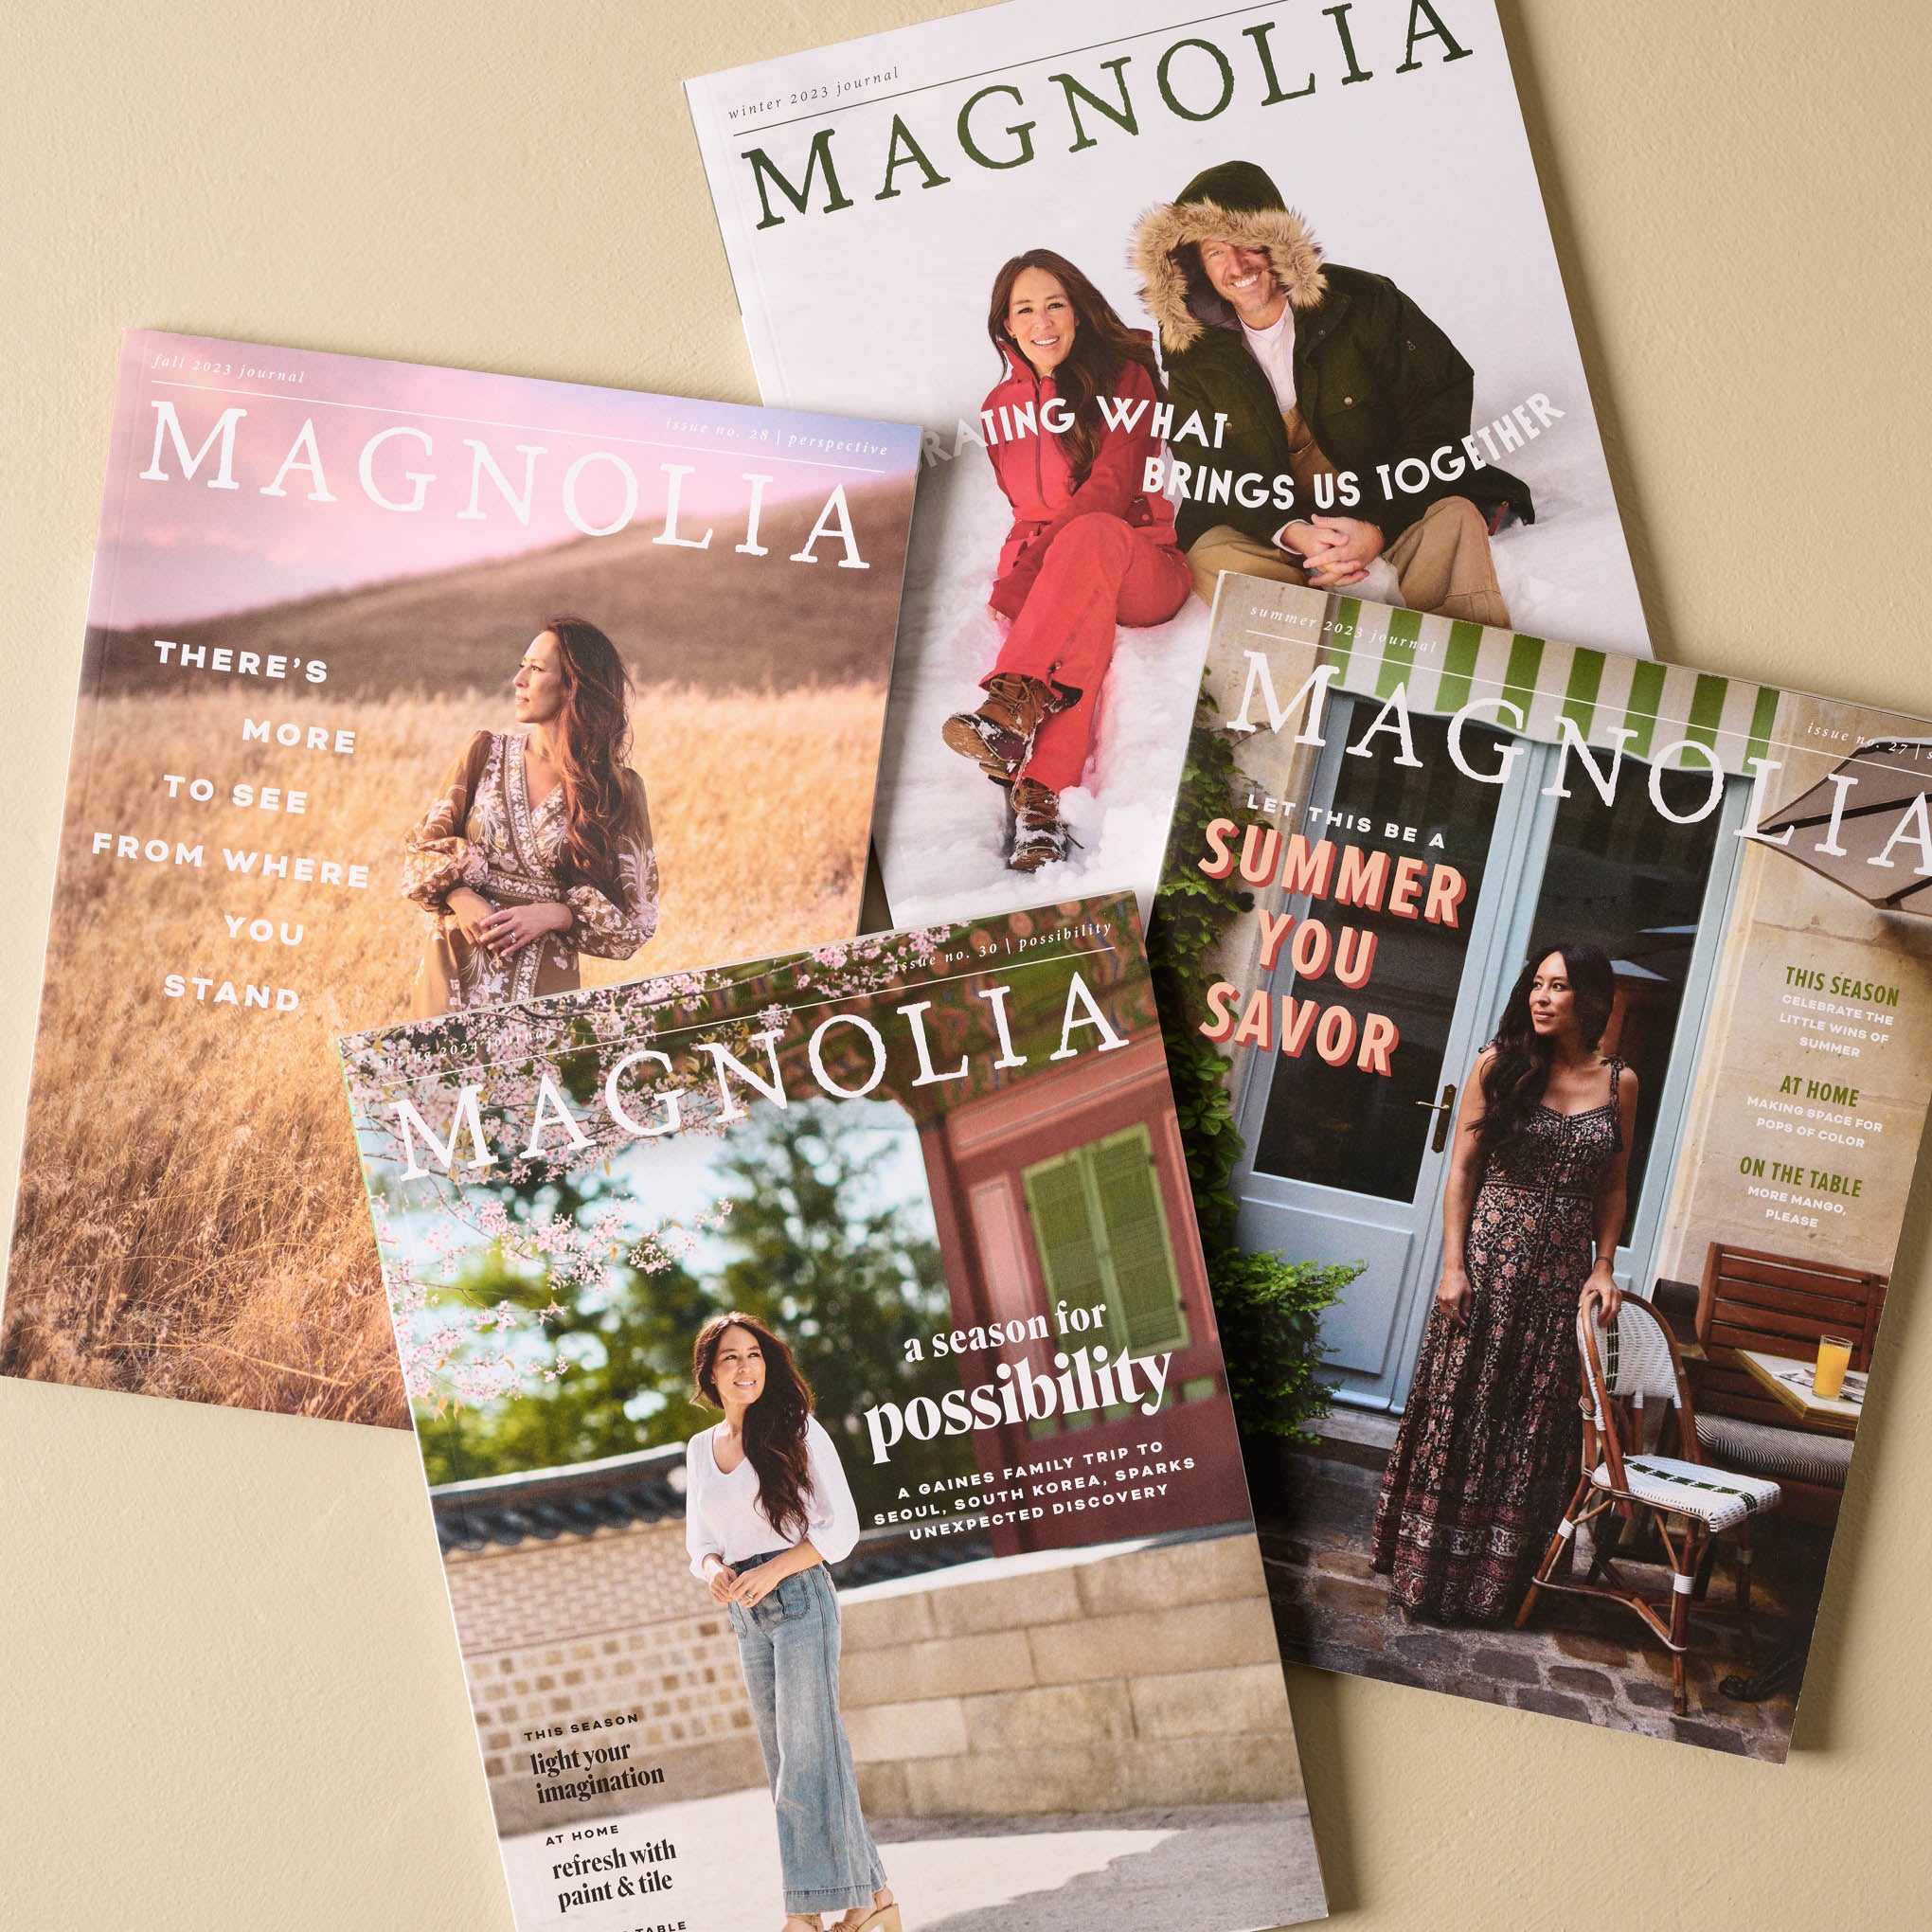 magnolia journal subscription incudes the spring, summer, fall and winter issuesItems range from $20.00 to $50.00